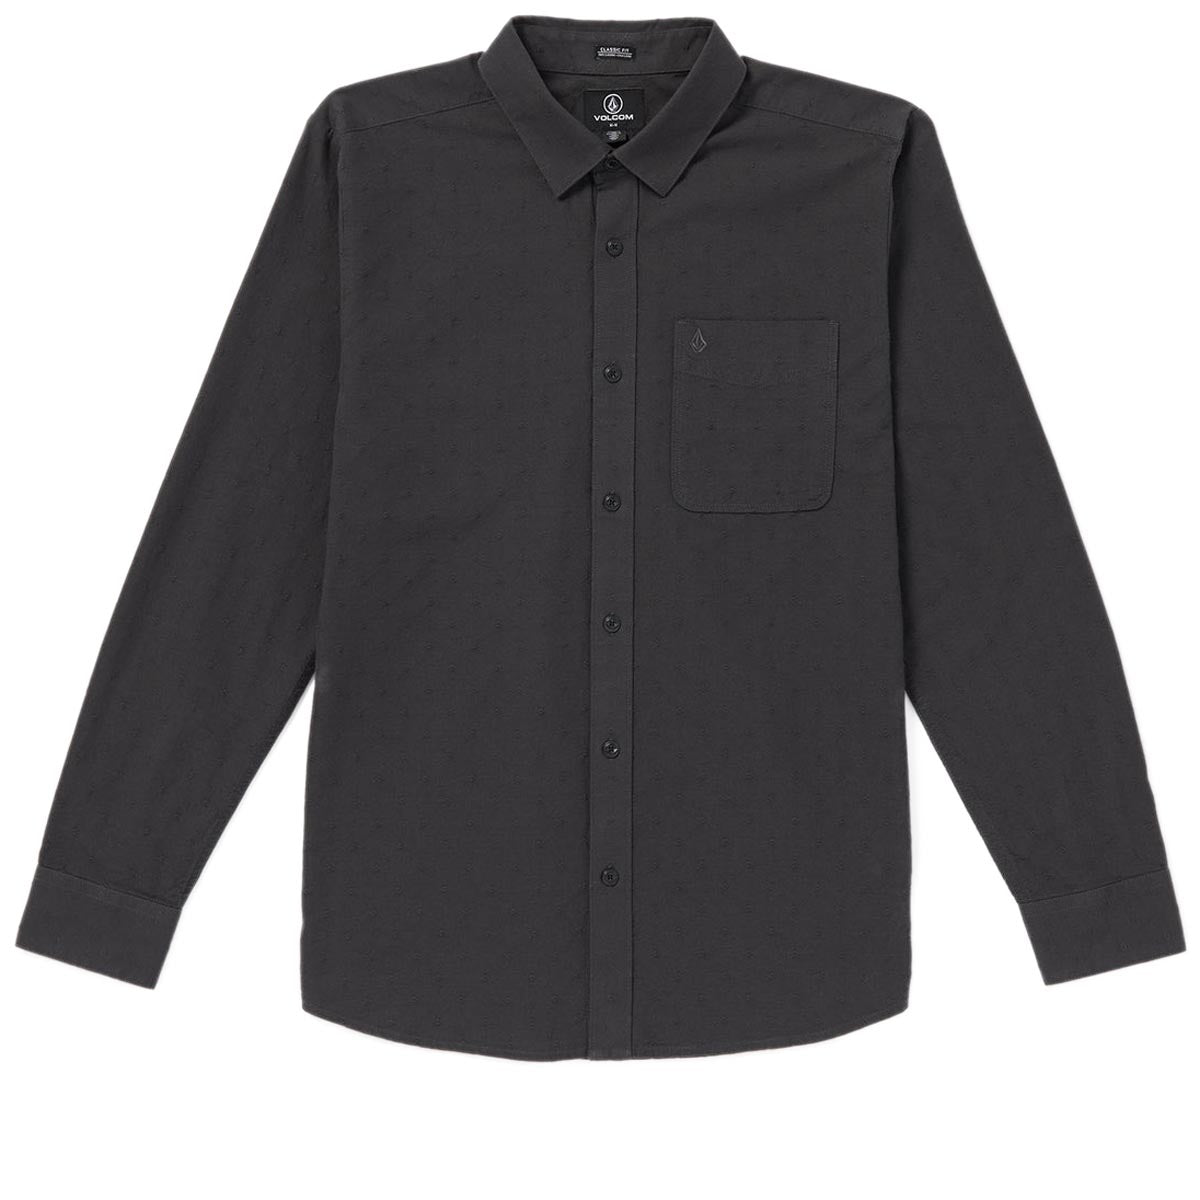 Volcom Date Knight Long Sleeve Shirt - Stealth image 1